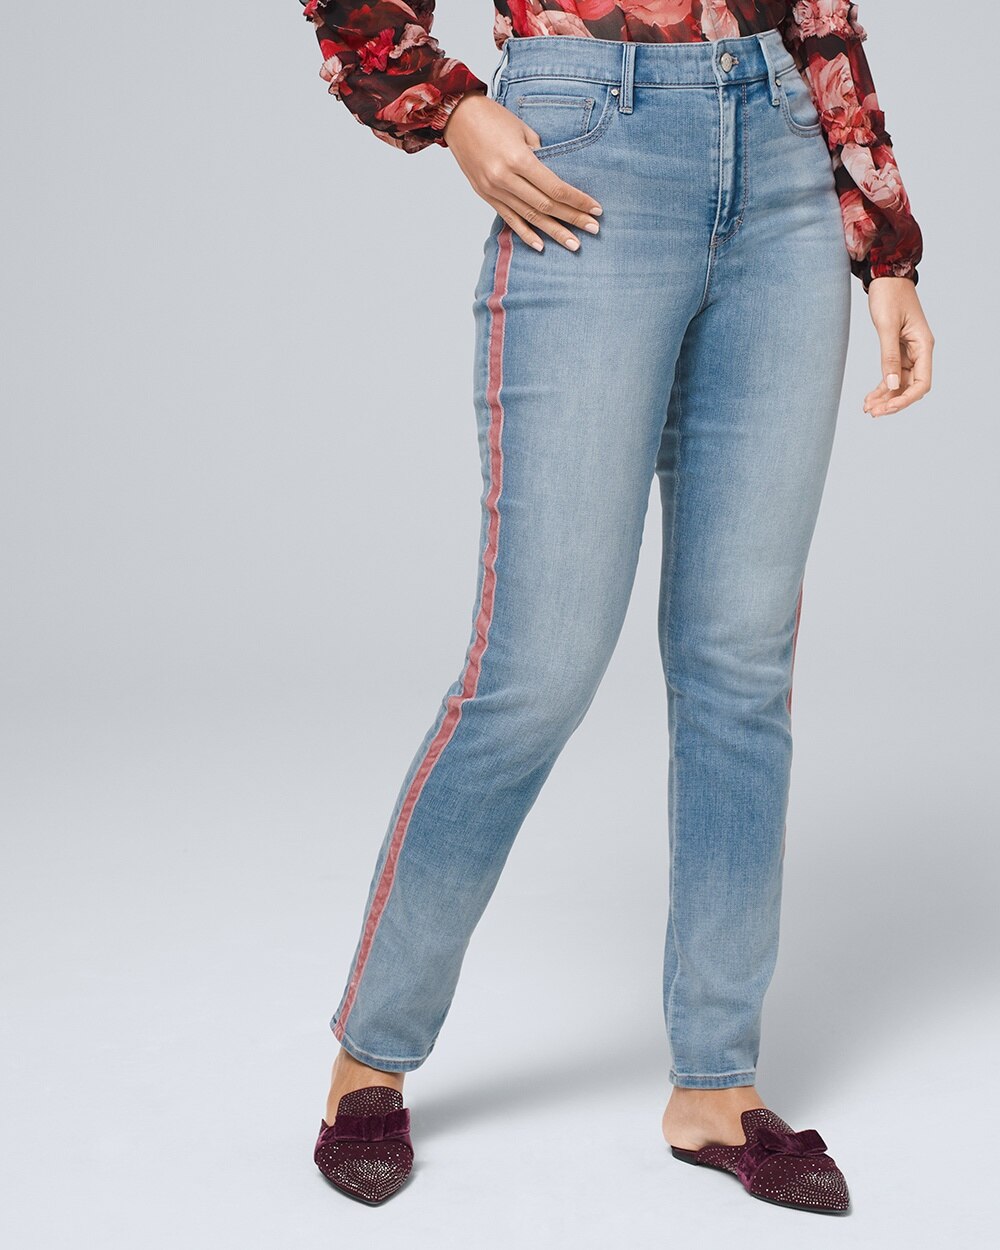 Curvy-Fit High-Rise Everyday Soft Denim\u2122 Slim Ankle Jeans With Piping Detail